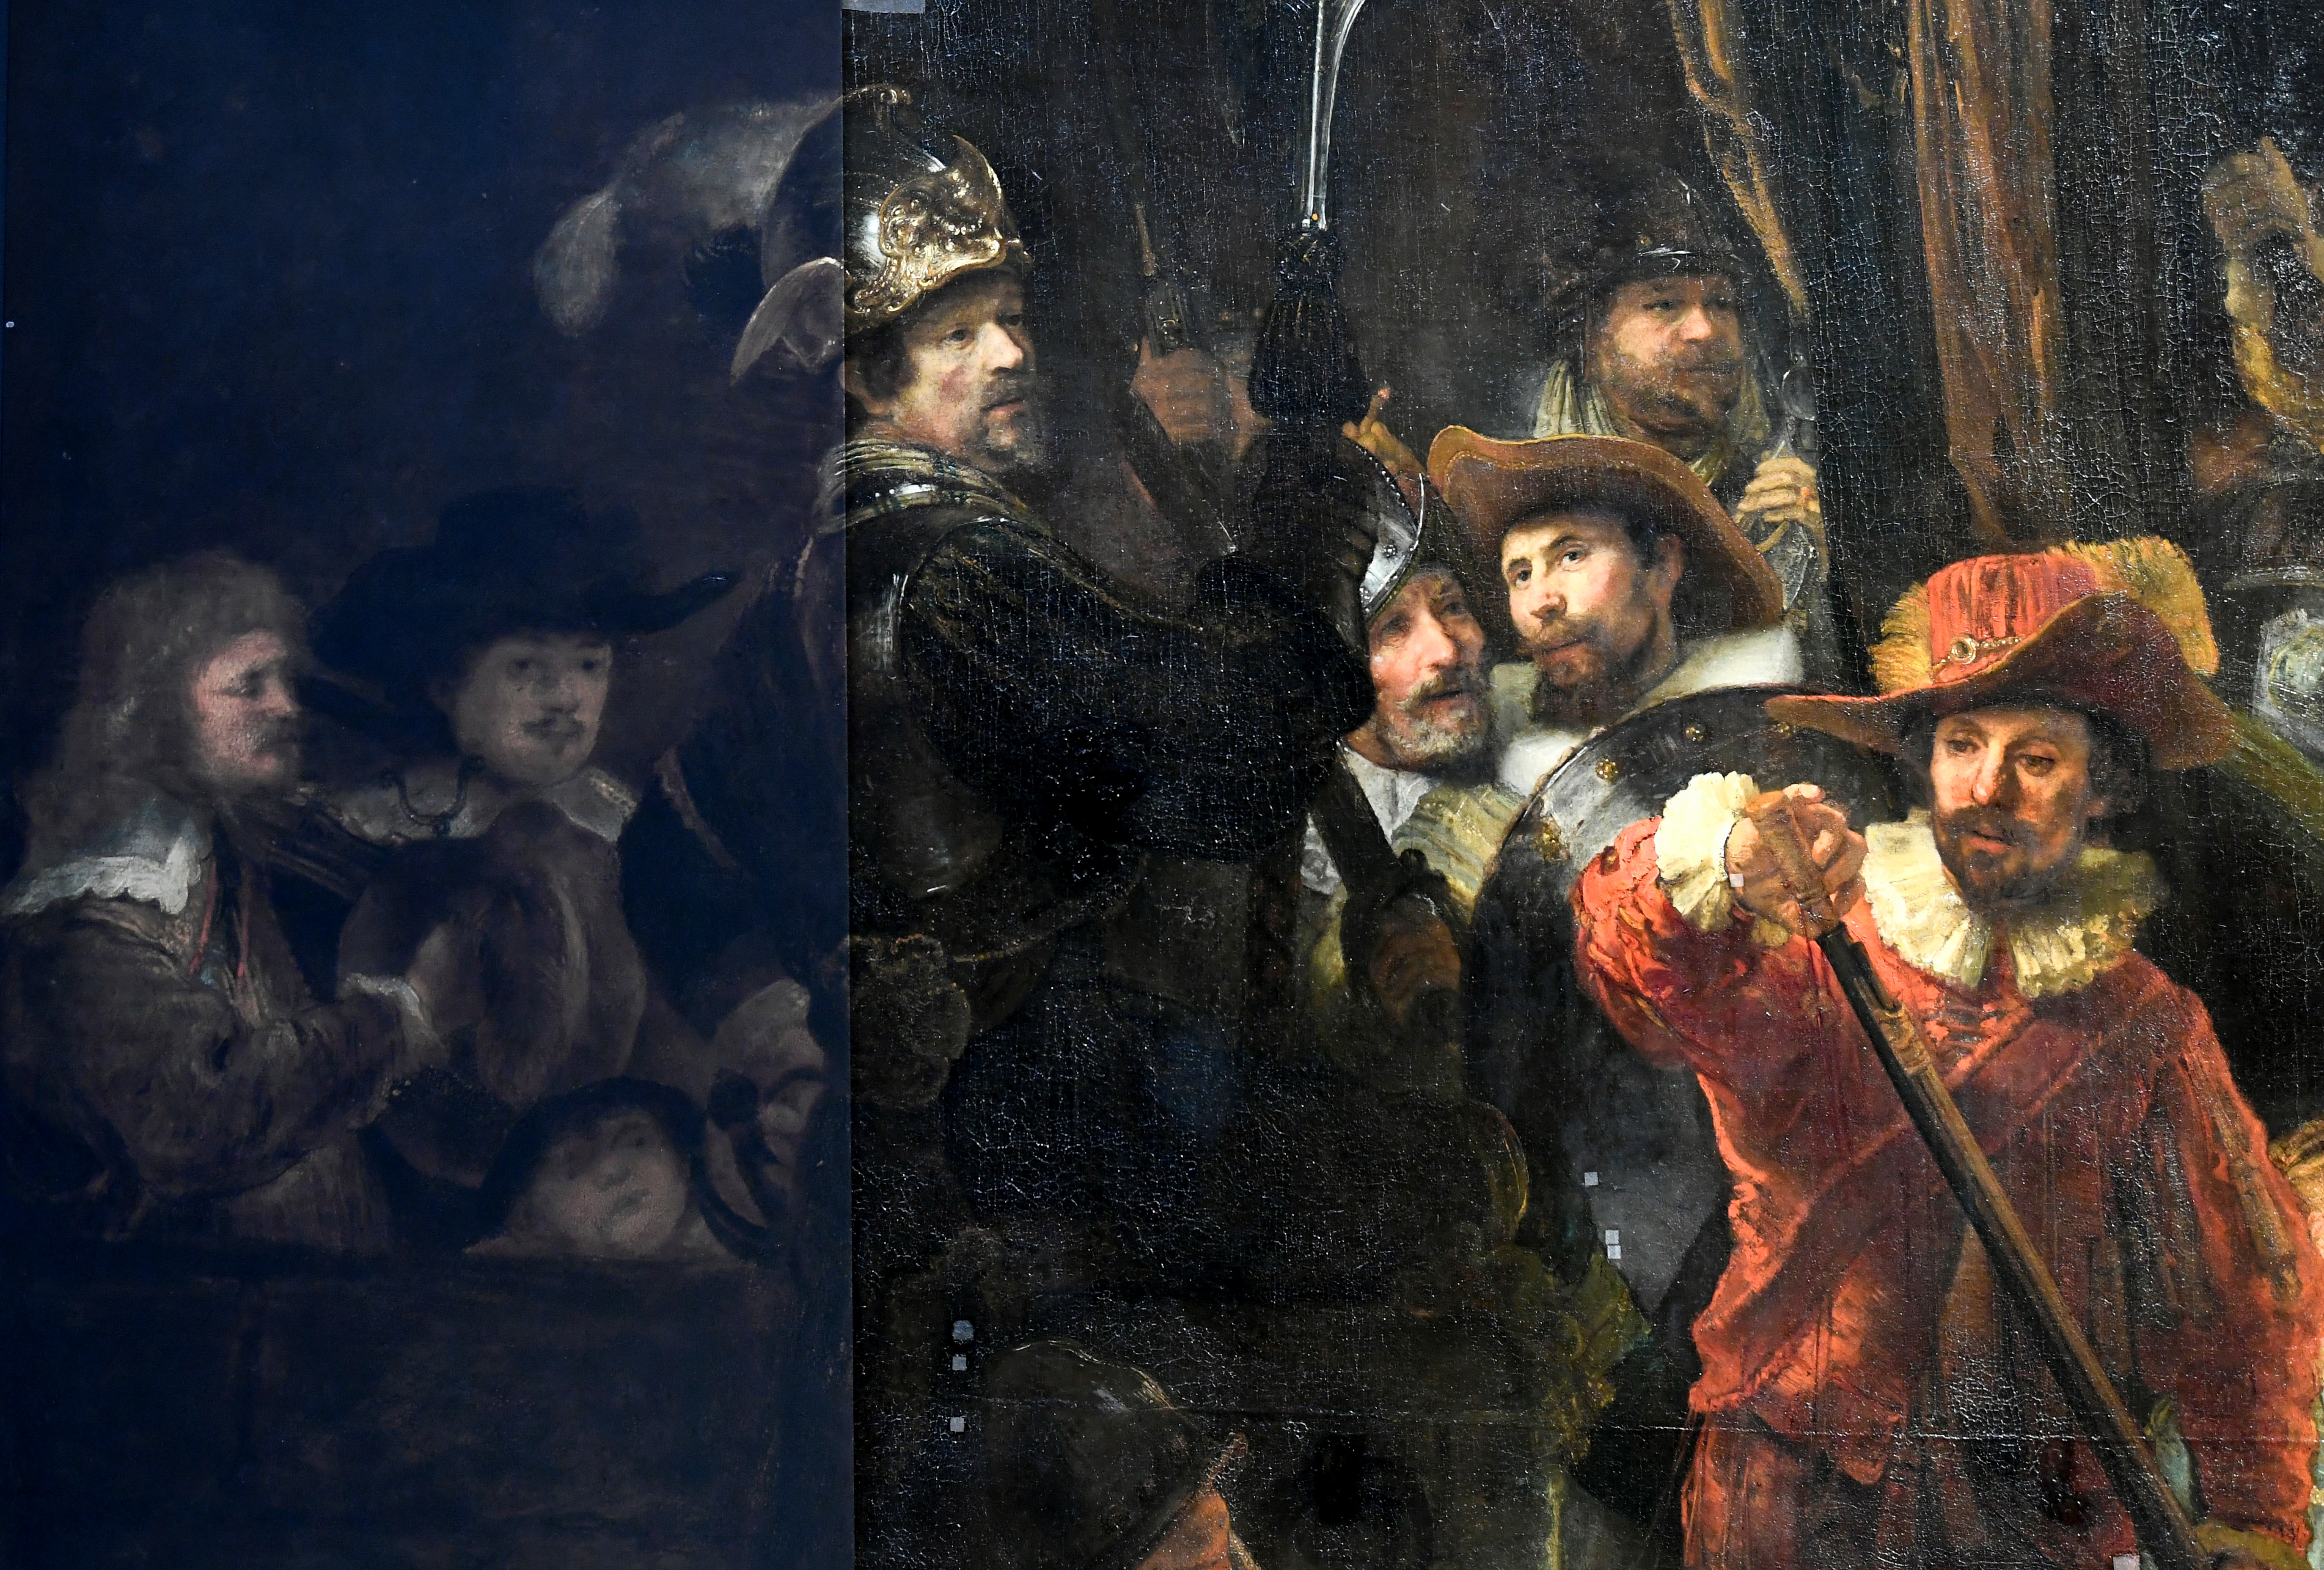 Rembrandt's famed Night Watch is seen back on display for the first time in 300 years, in what researchers say is its original size, with missing parts temporarily restored in an exhibition aided by artificial intelligence at Rijksmuseum in Amsterdam, Netherlands June 23, 2021. REUTERS/Piroschka van de Wouw 